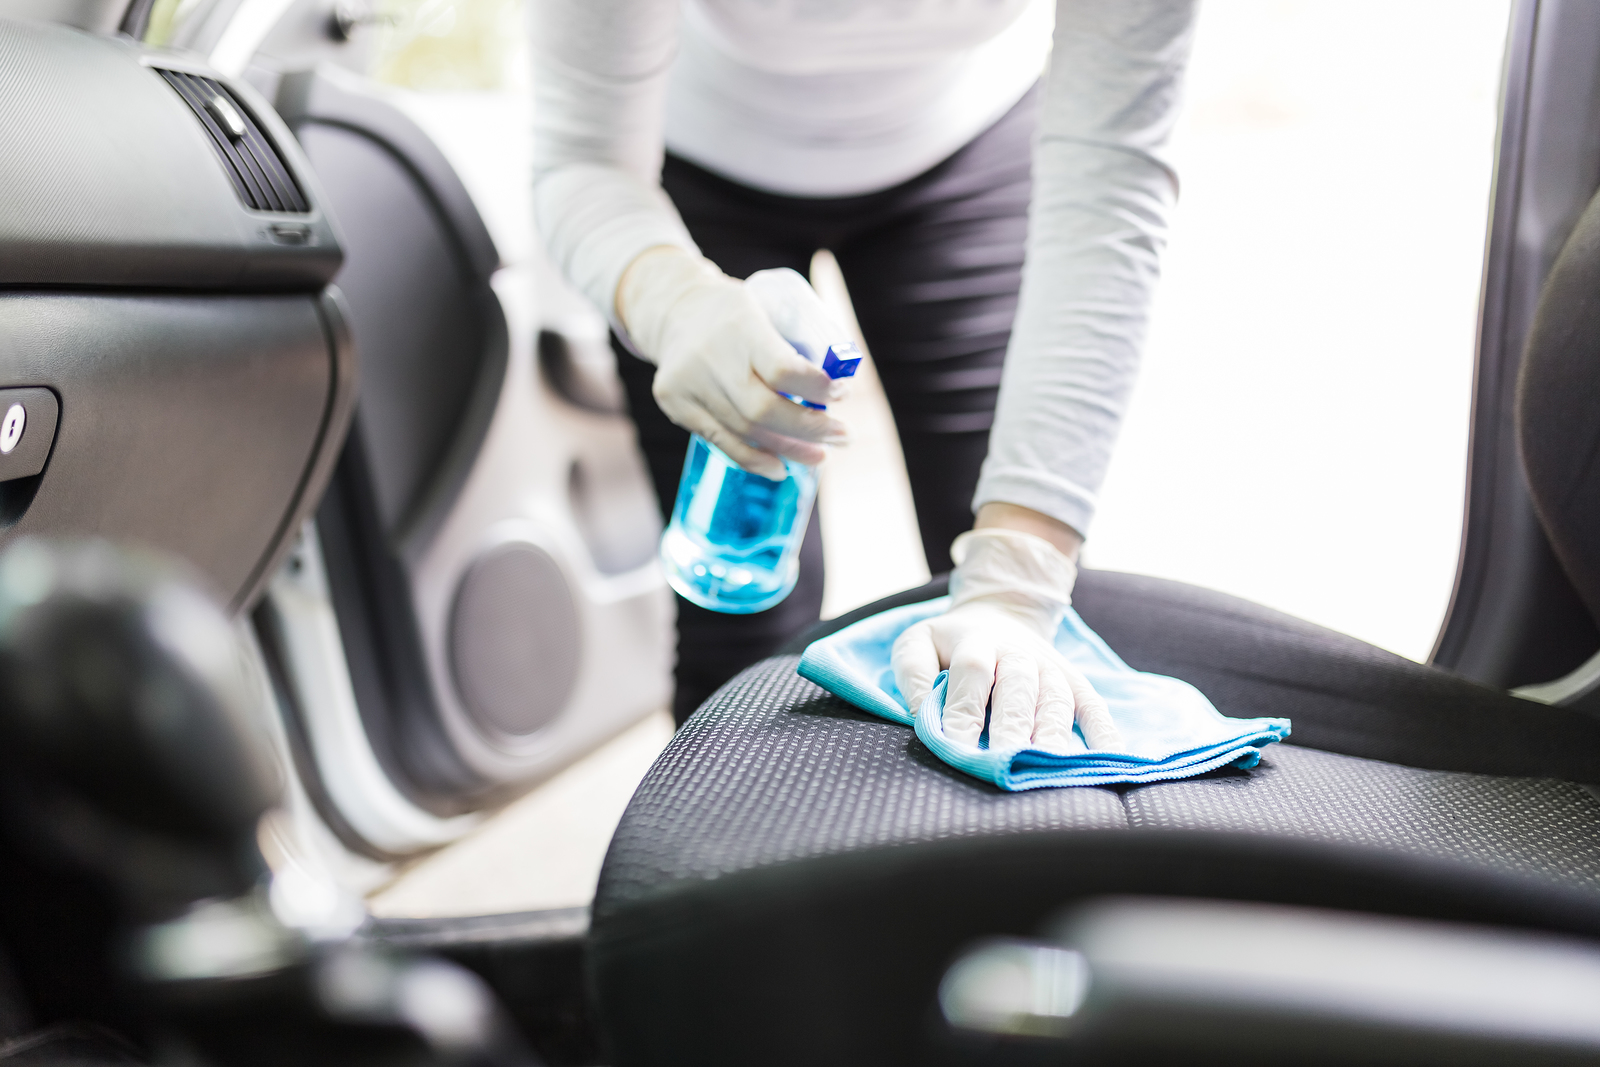 Get Stains Out Of Fabric Car Seats, How To Remove Old Stains From Cloth Car Seats